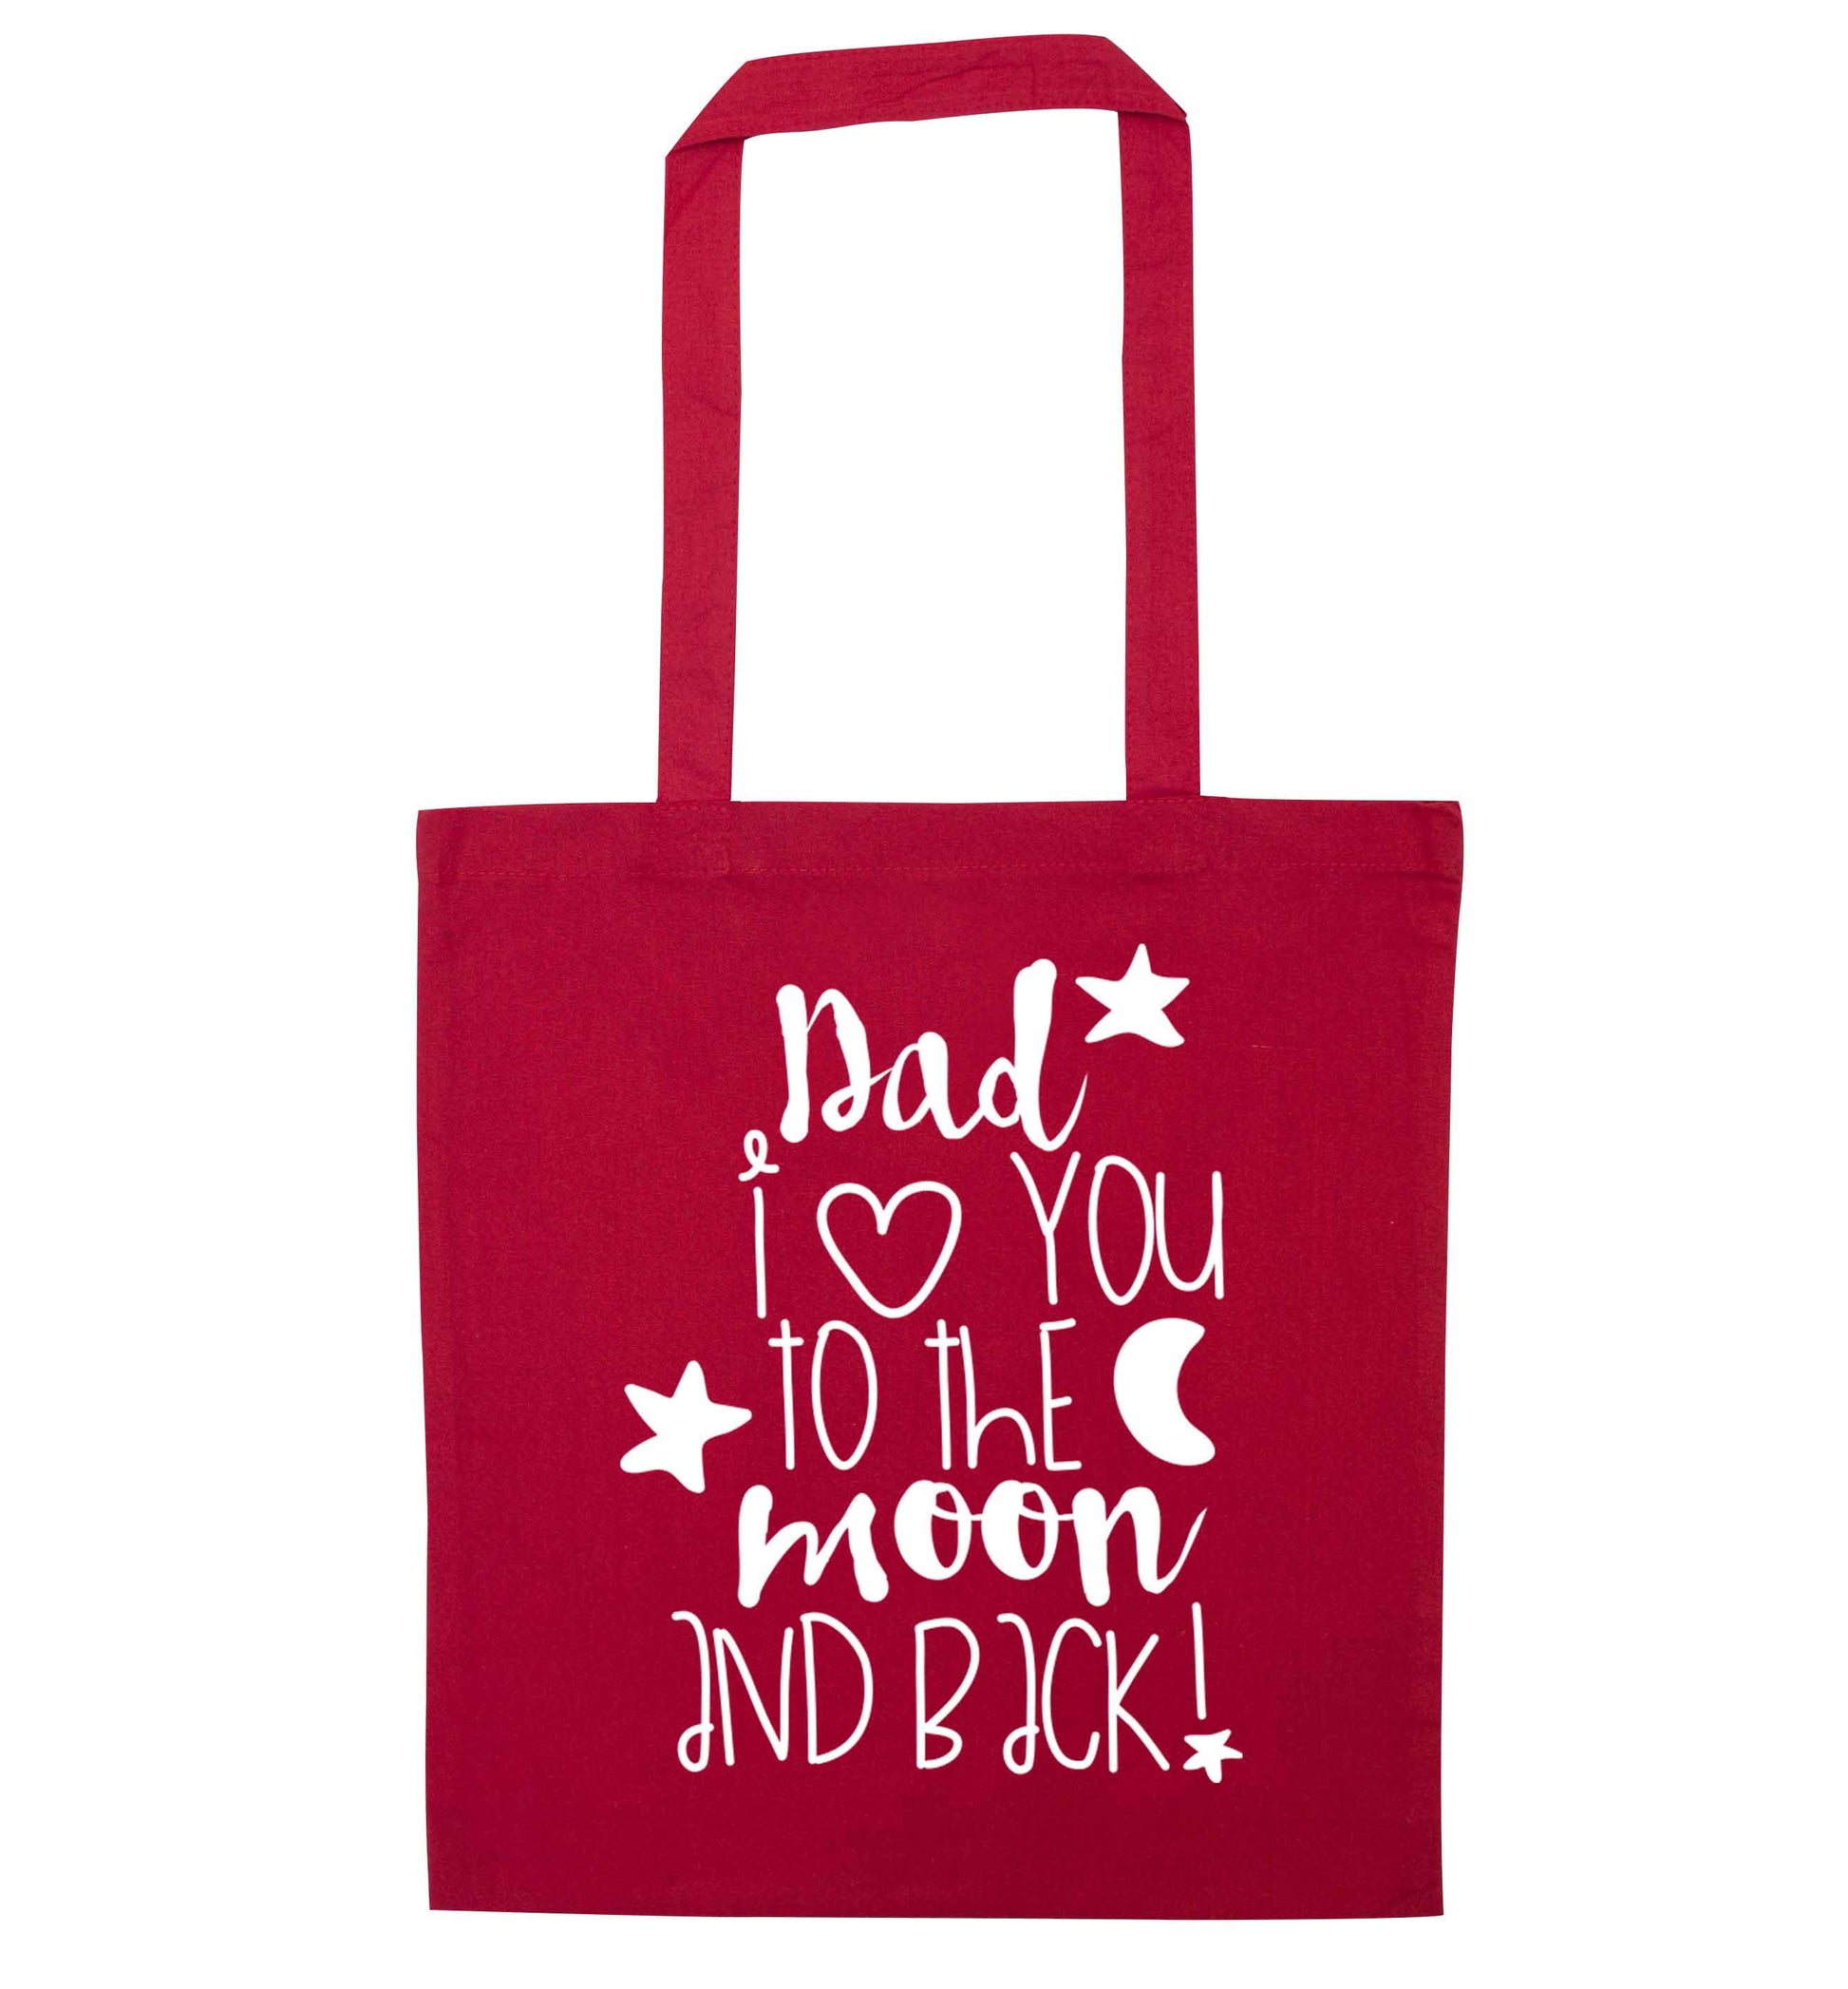 Dad I love you to the moon and back red tote bag